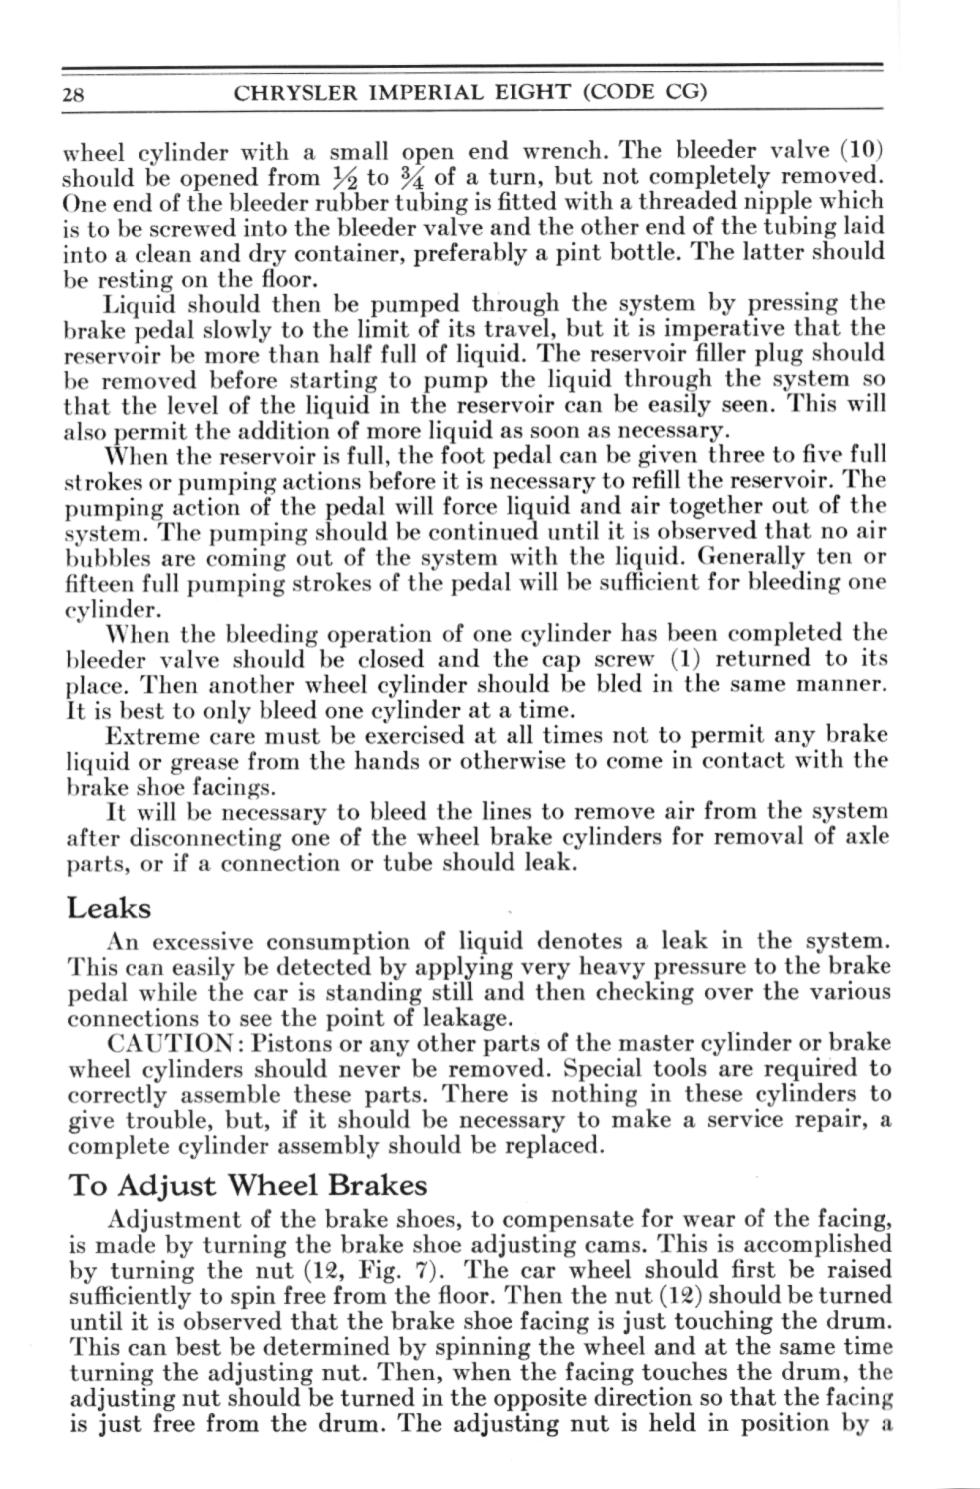 1931 Chrysler Imperial Owners Manual Page 14